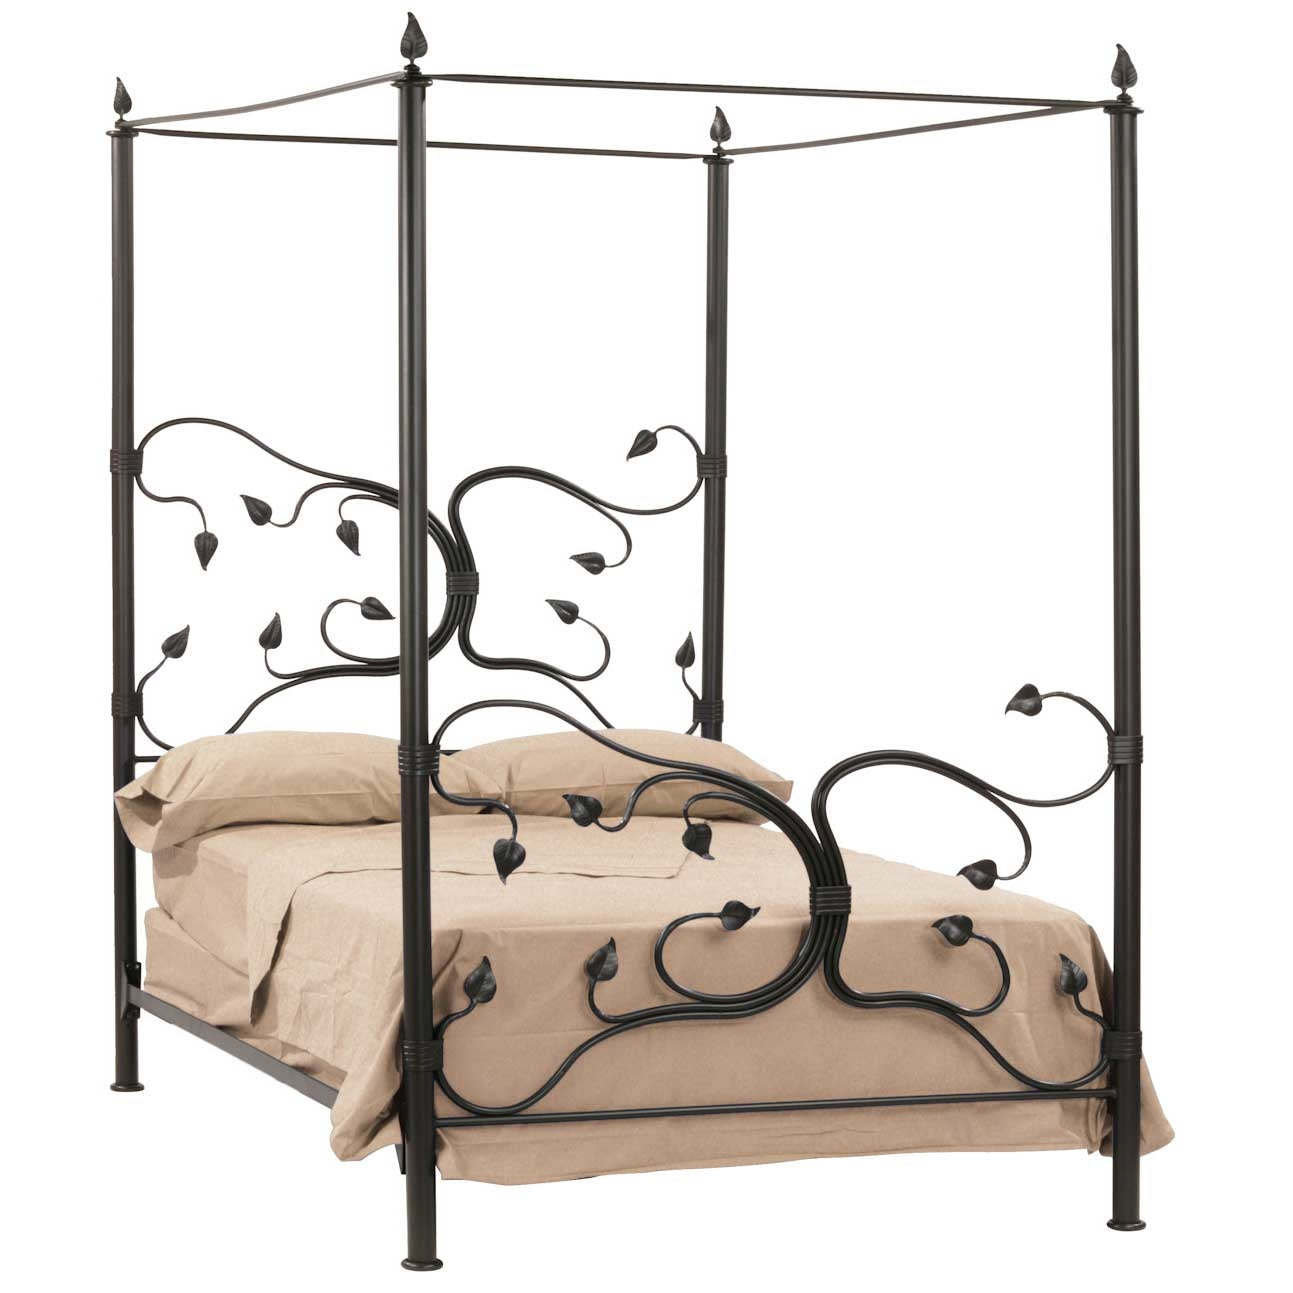 Wrought Iron Canopy Bed Eden Isle, Iron Canopy Bed Frame